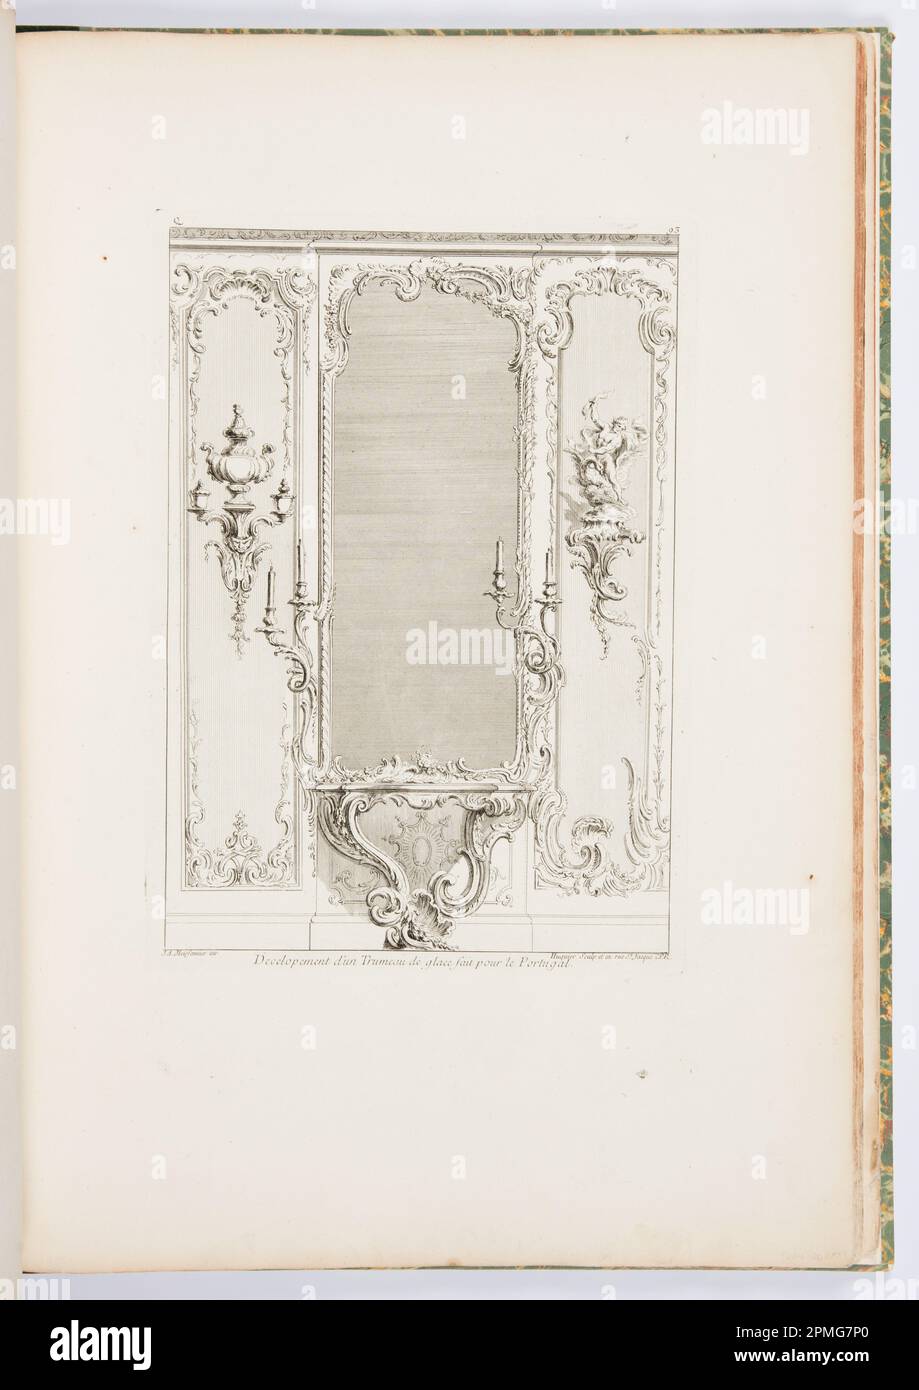 Print, Plate 3, Developement d'un Trumeau de glace fait pour le Portugal (Design for a Pier Glass with Varation for Portugal), Oeuvre de Juste-Aurèle Meissonnier (Works of Juste-Aurèle Meissonnier); Designed by Juste-Aurèle Meissonnier (French, b. Italy, 1695–1750); Engraved by Gabriel Huquier (French, 1695–1772); France; engraving on white laid paper; Platemark: 36.5 × 25.7 cm (14 3/8 × 10 1/8 in.) Sheet: 59.1 × 40.6 cm (23 1/4 × 16 in.) Stock Photo